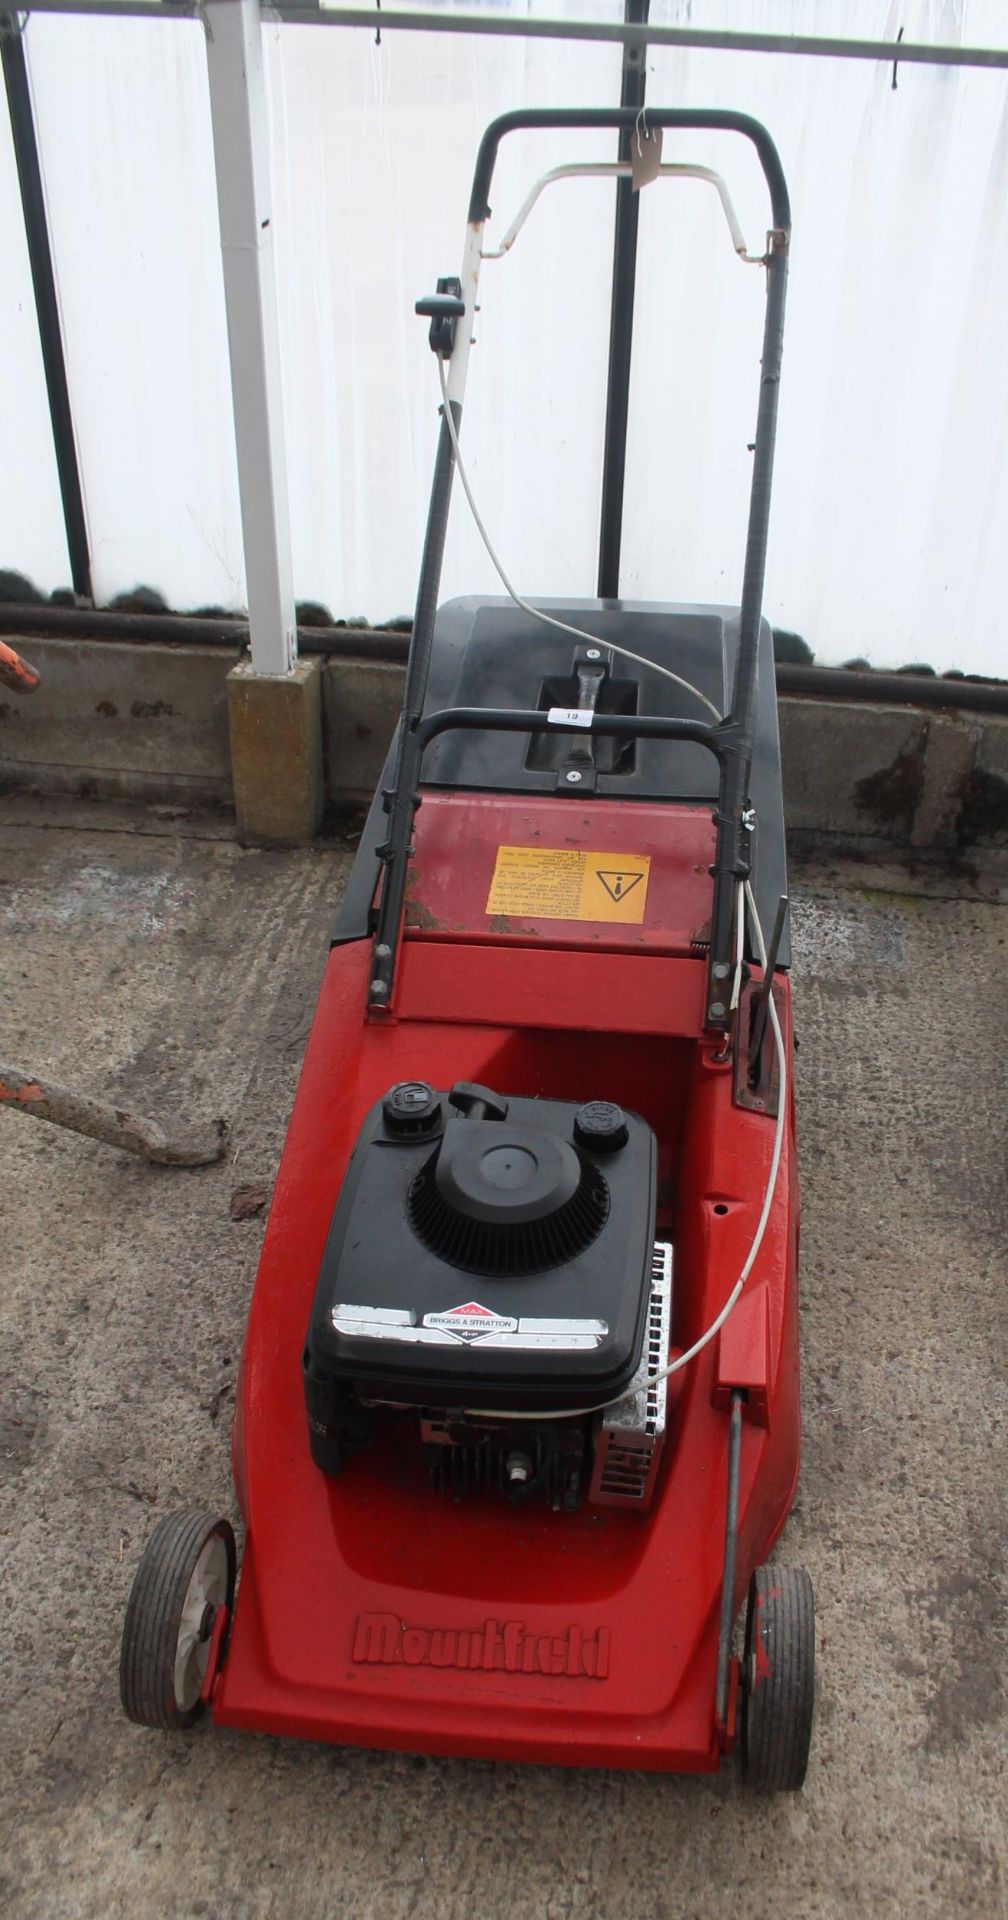 A MOUNTFIELD LAWN MOWER WITH A BRIGGS & STRATTON 4HP ENGINE + VAT